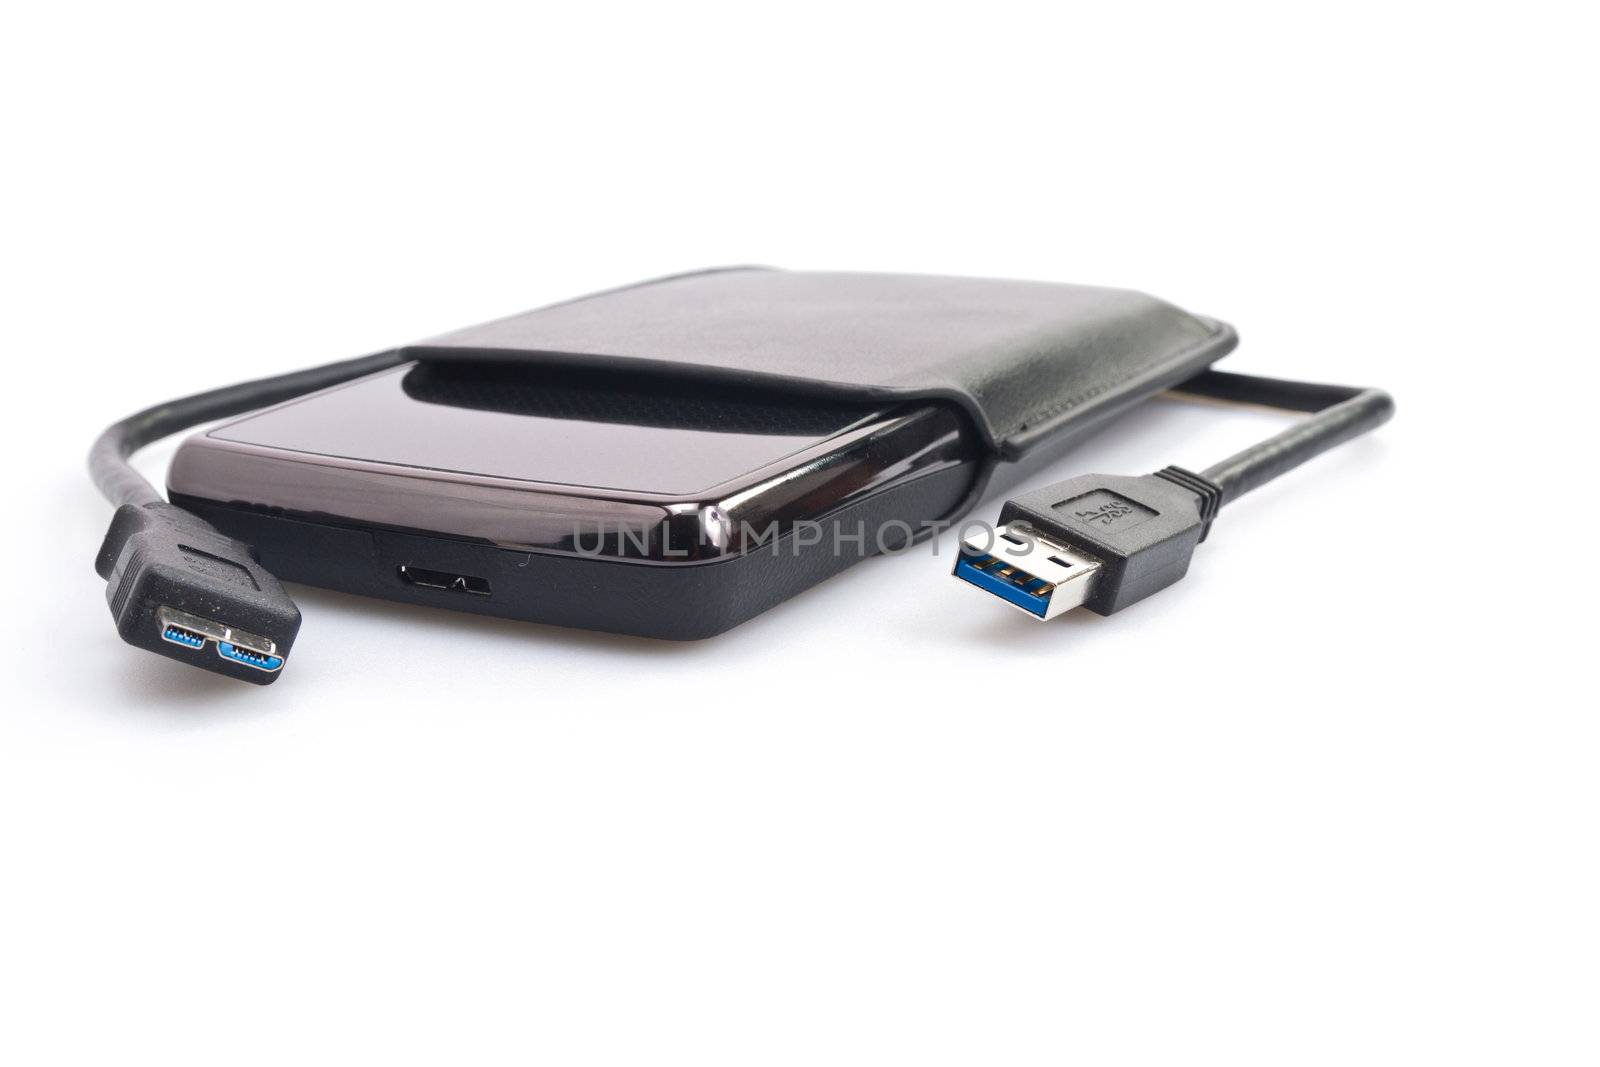 Portable Harddisk With USB cable by azamshah72